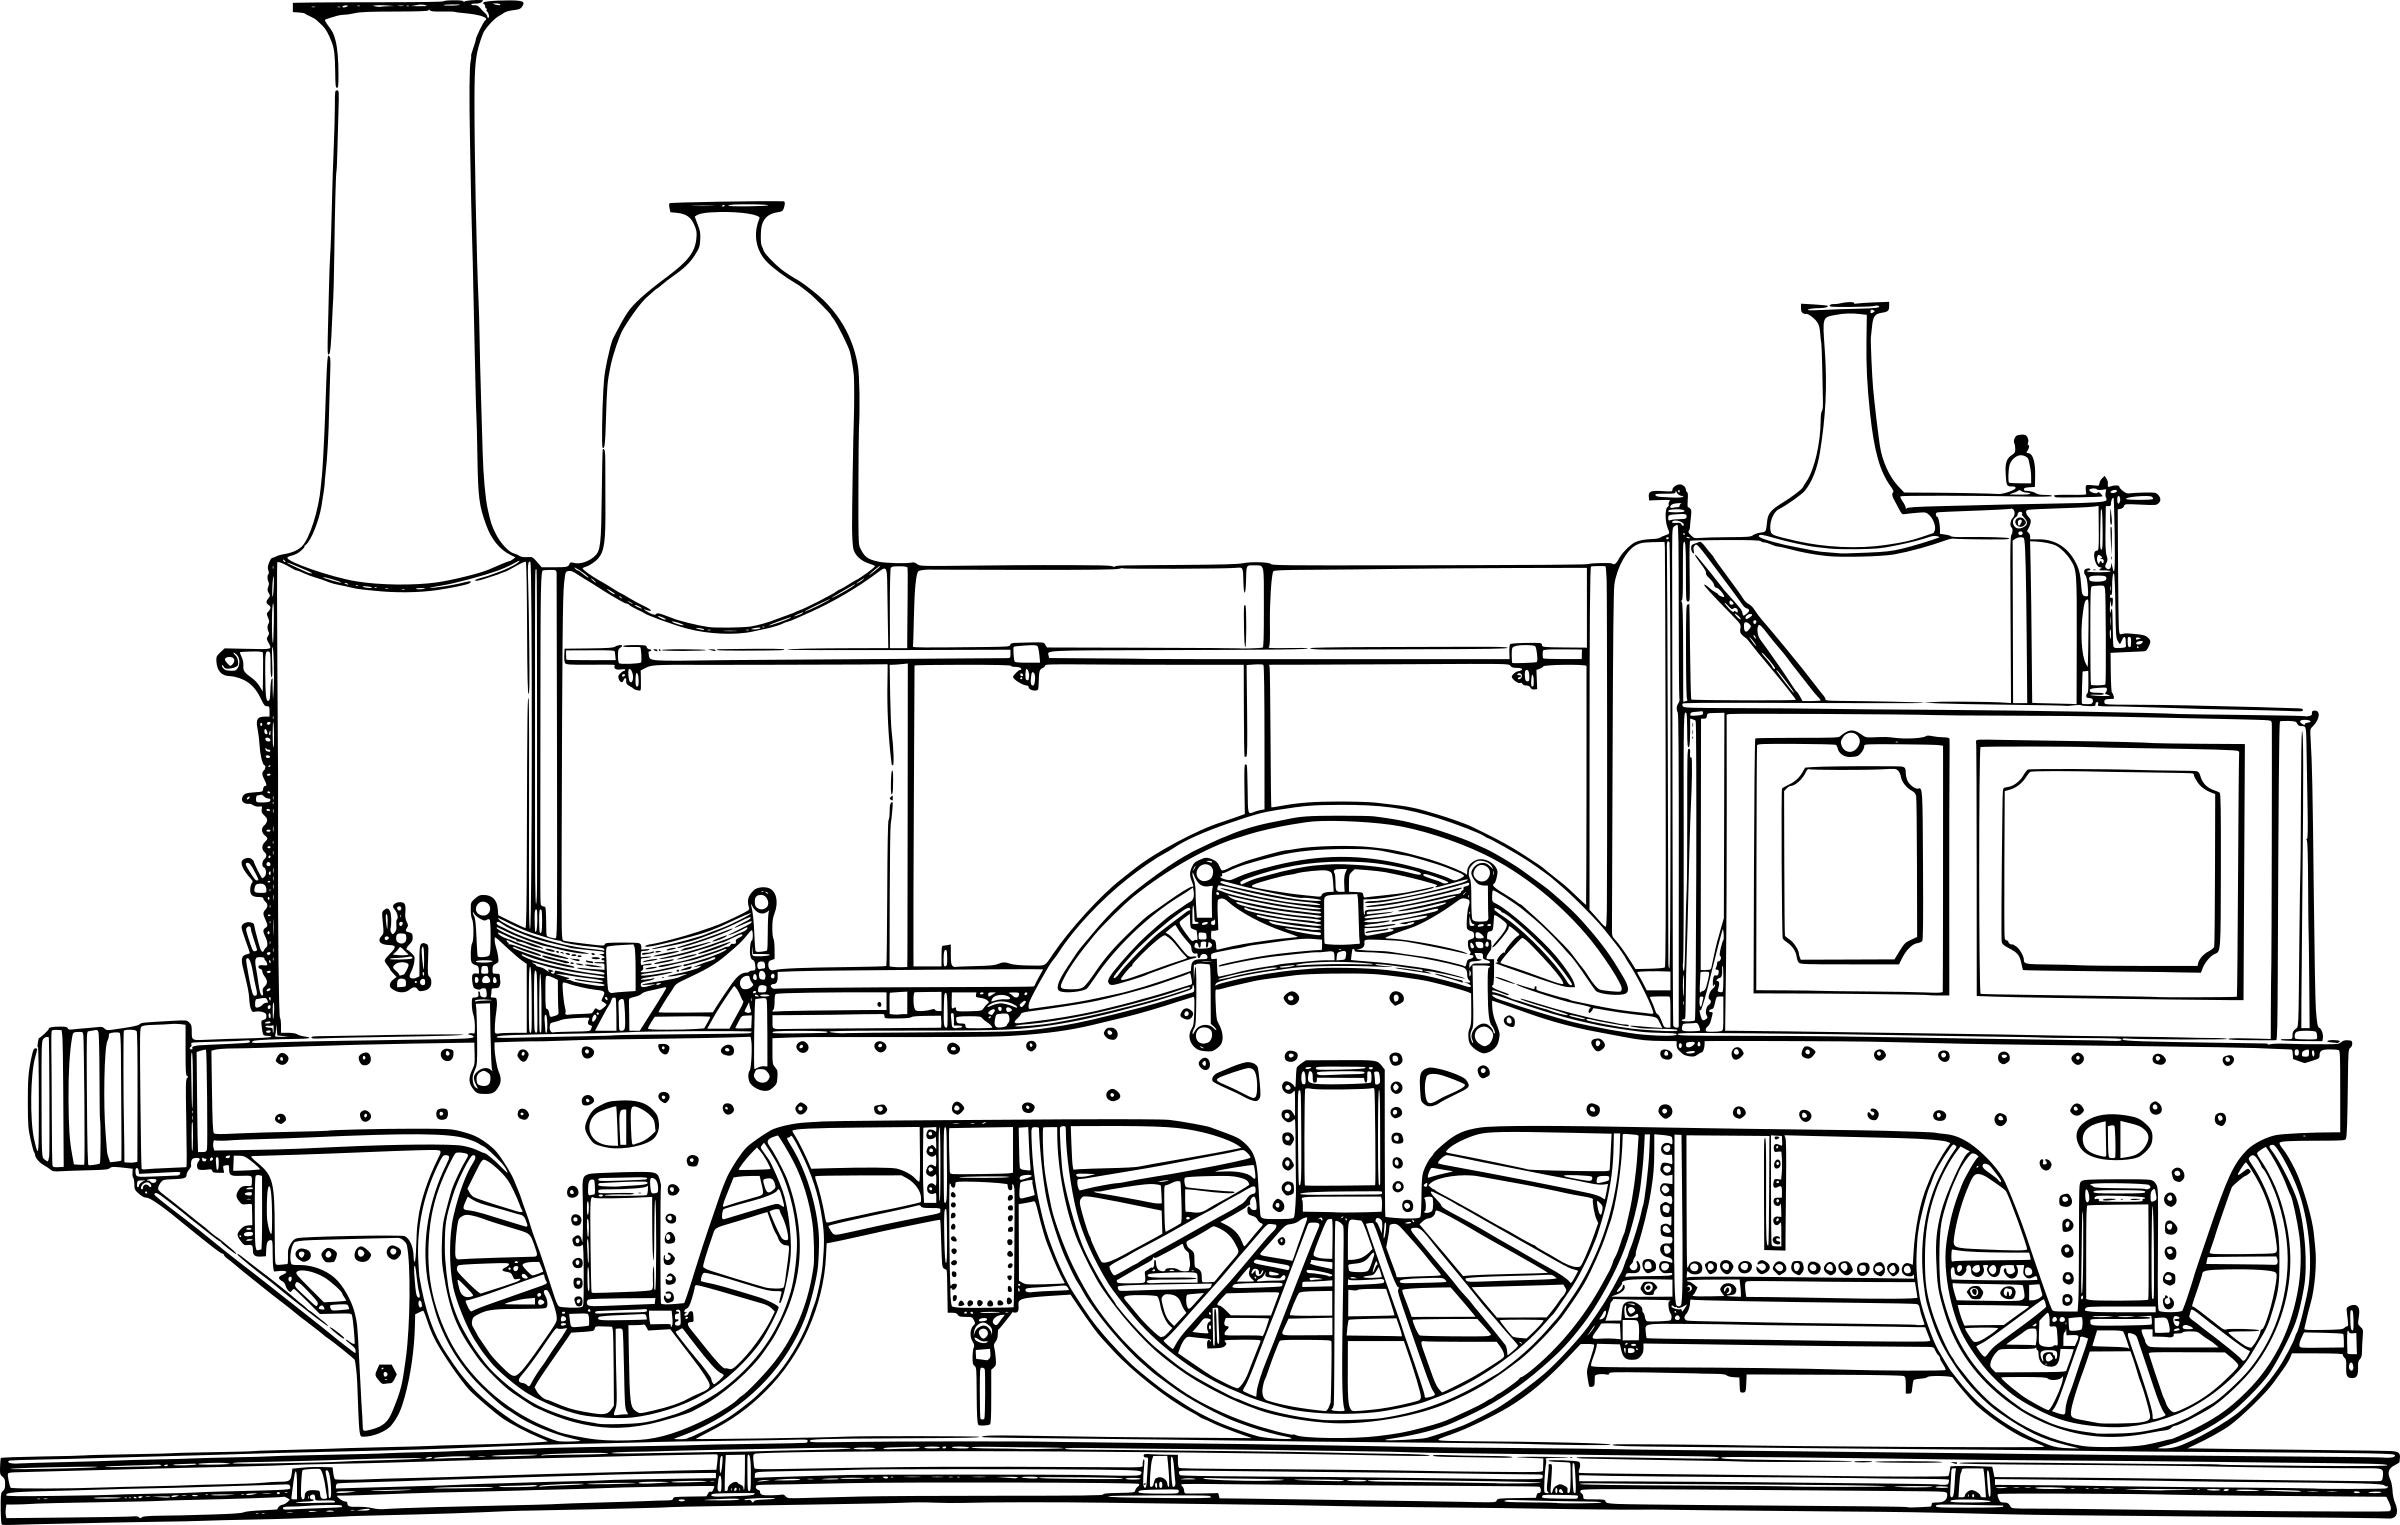 Diagram Of A Steam Engine Free Tea Icons Png Tea Images 10 Free Png and Icons Downloads Of Diagram Of A Steam Engine